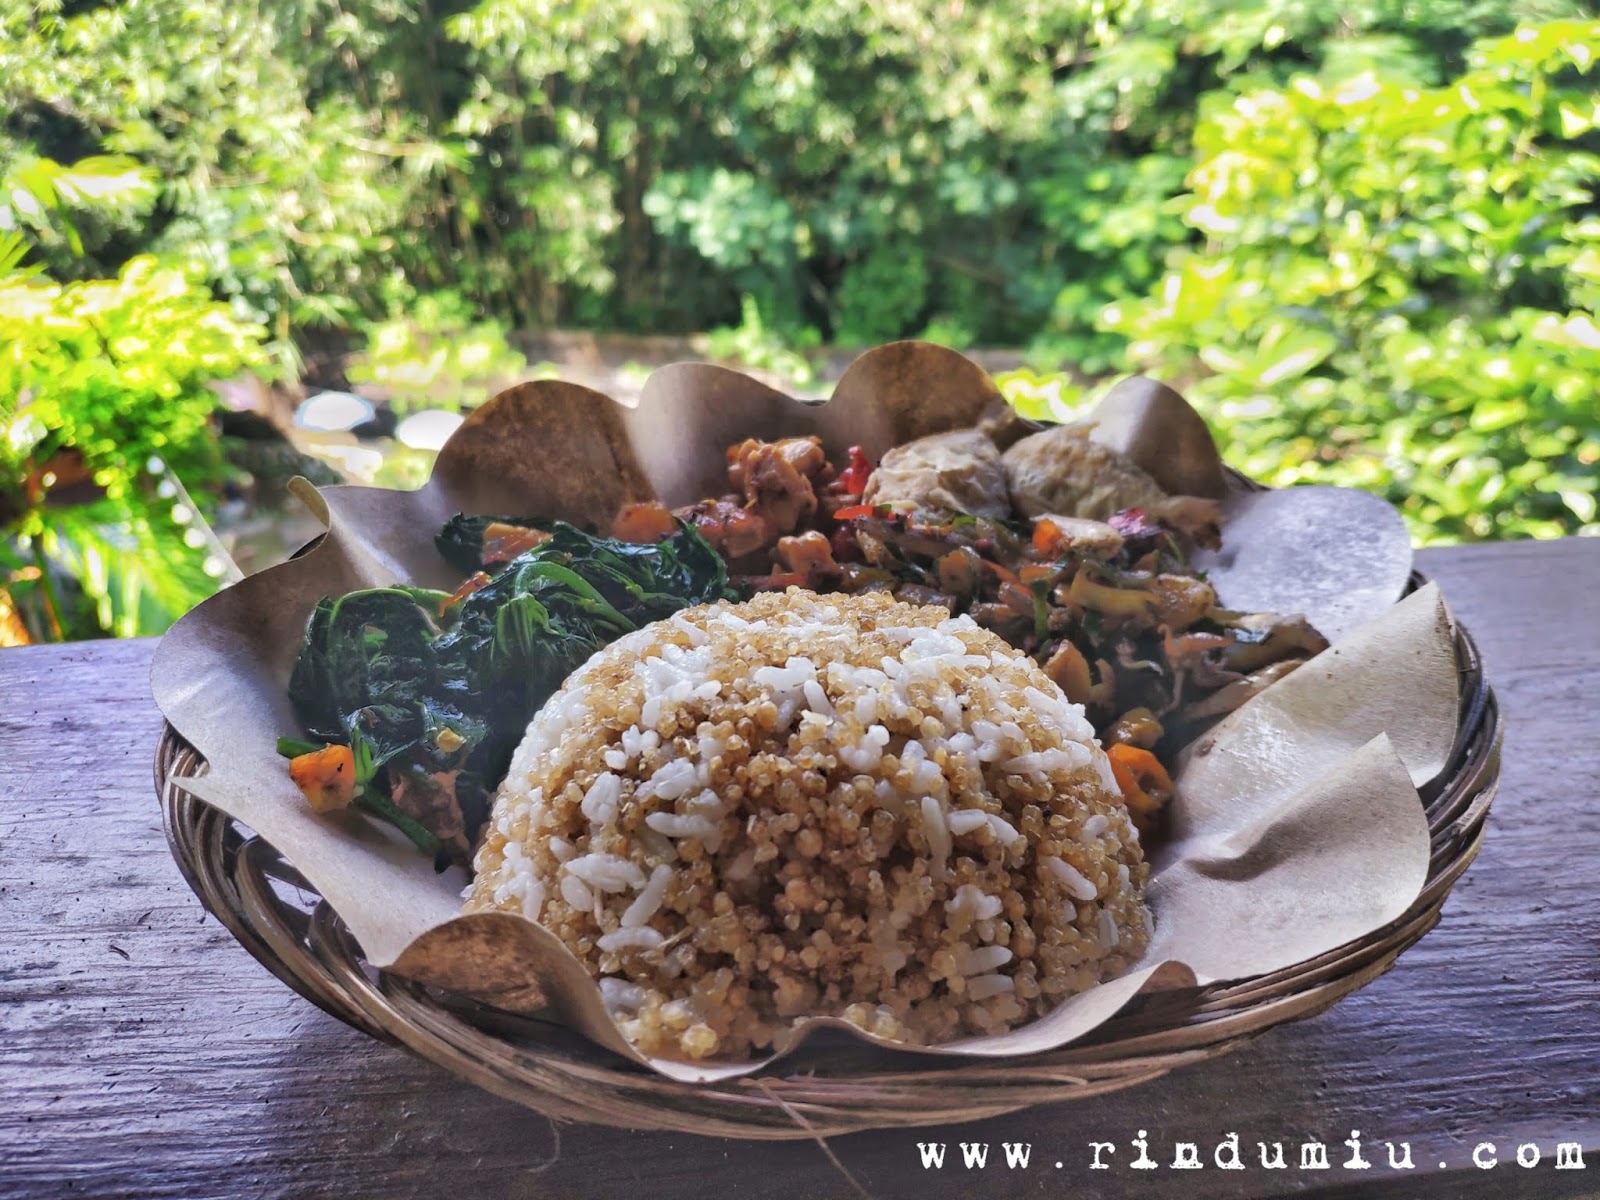 Sego Thiwul Kumplit consists of a portion of sego thiwul, vegetables, spicy stir-fried tempeh, spicy stir-fried anchovies, and gereh or common barb fish at Kopi Plosok Sego Thiwul in Sleman Jogja